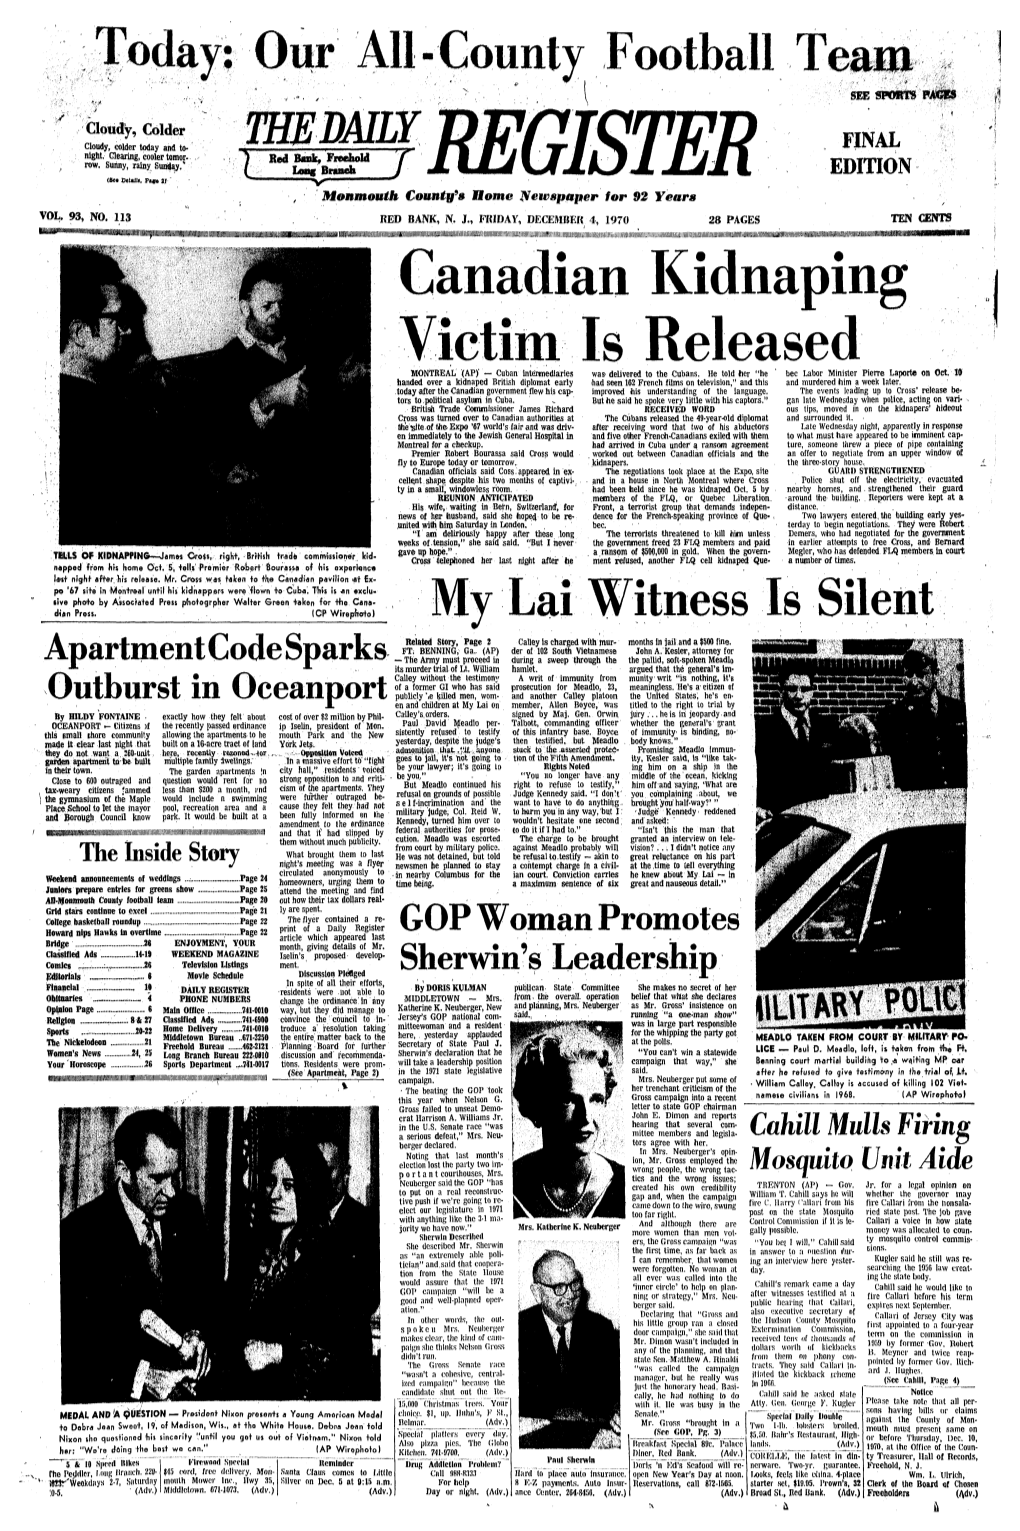 An Kidnaping Is Released MONTREAL (AP)" — Cuban Intermediaries Was- Delivered to the Cubans